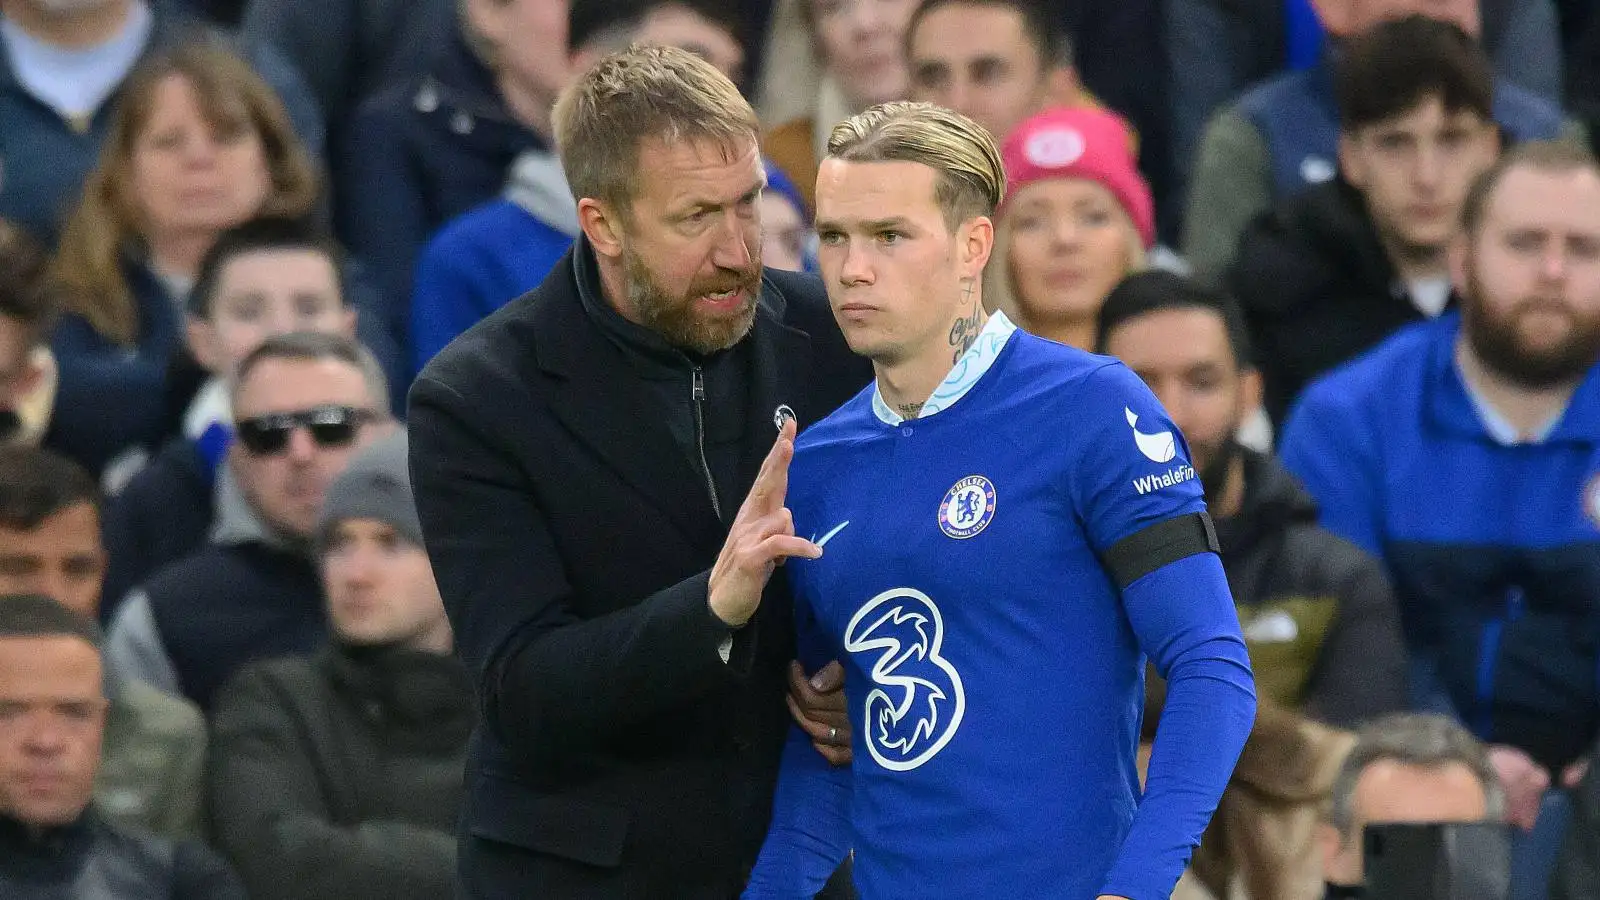 Chelsea boss Graham Potter gives Mykhaylo Mudryk instructions